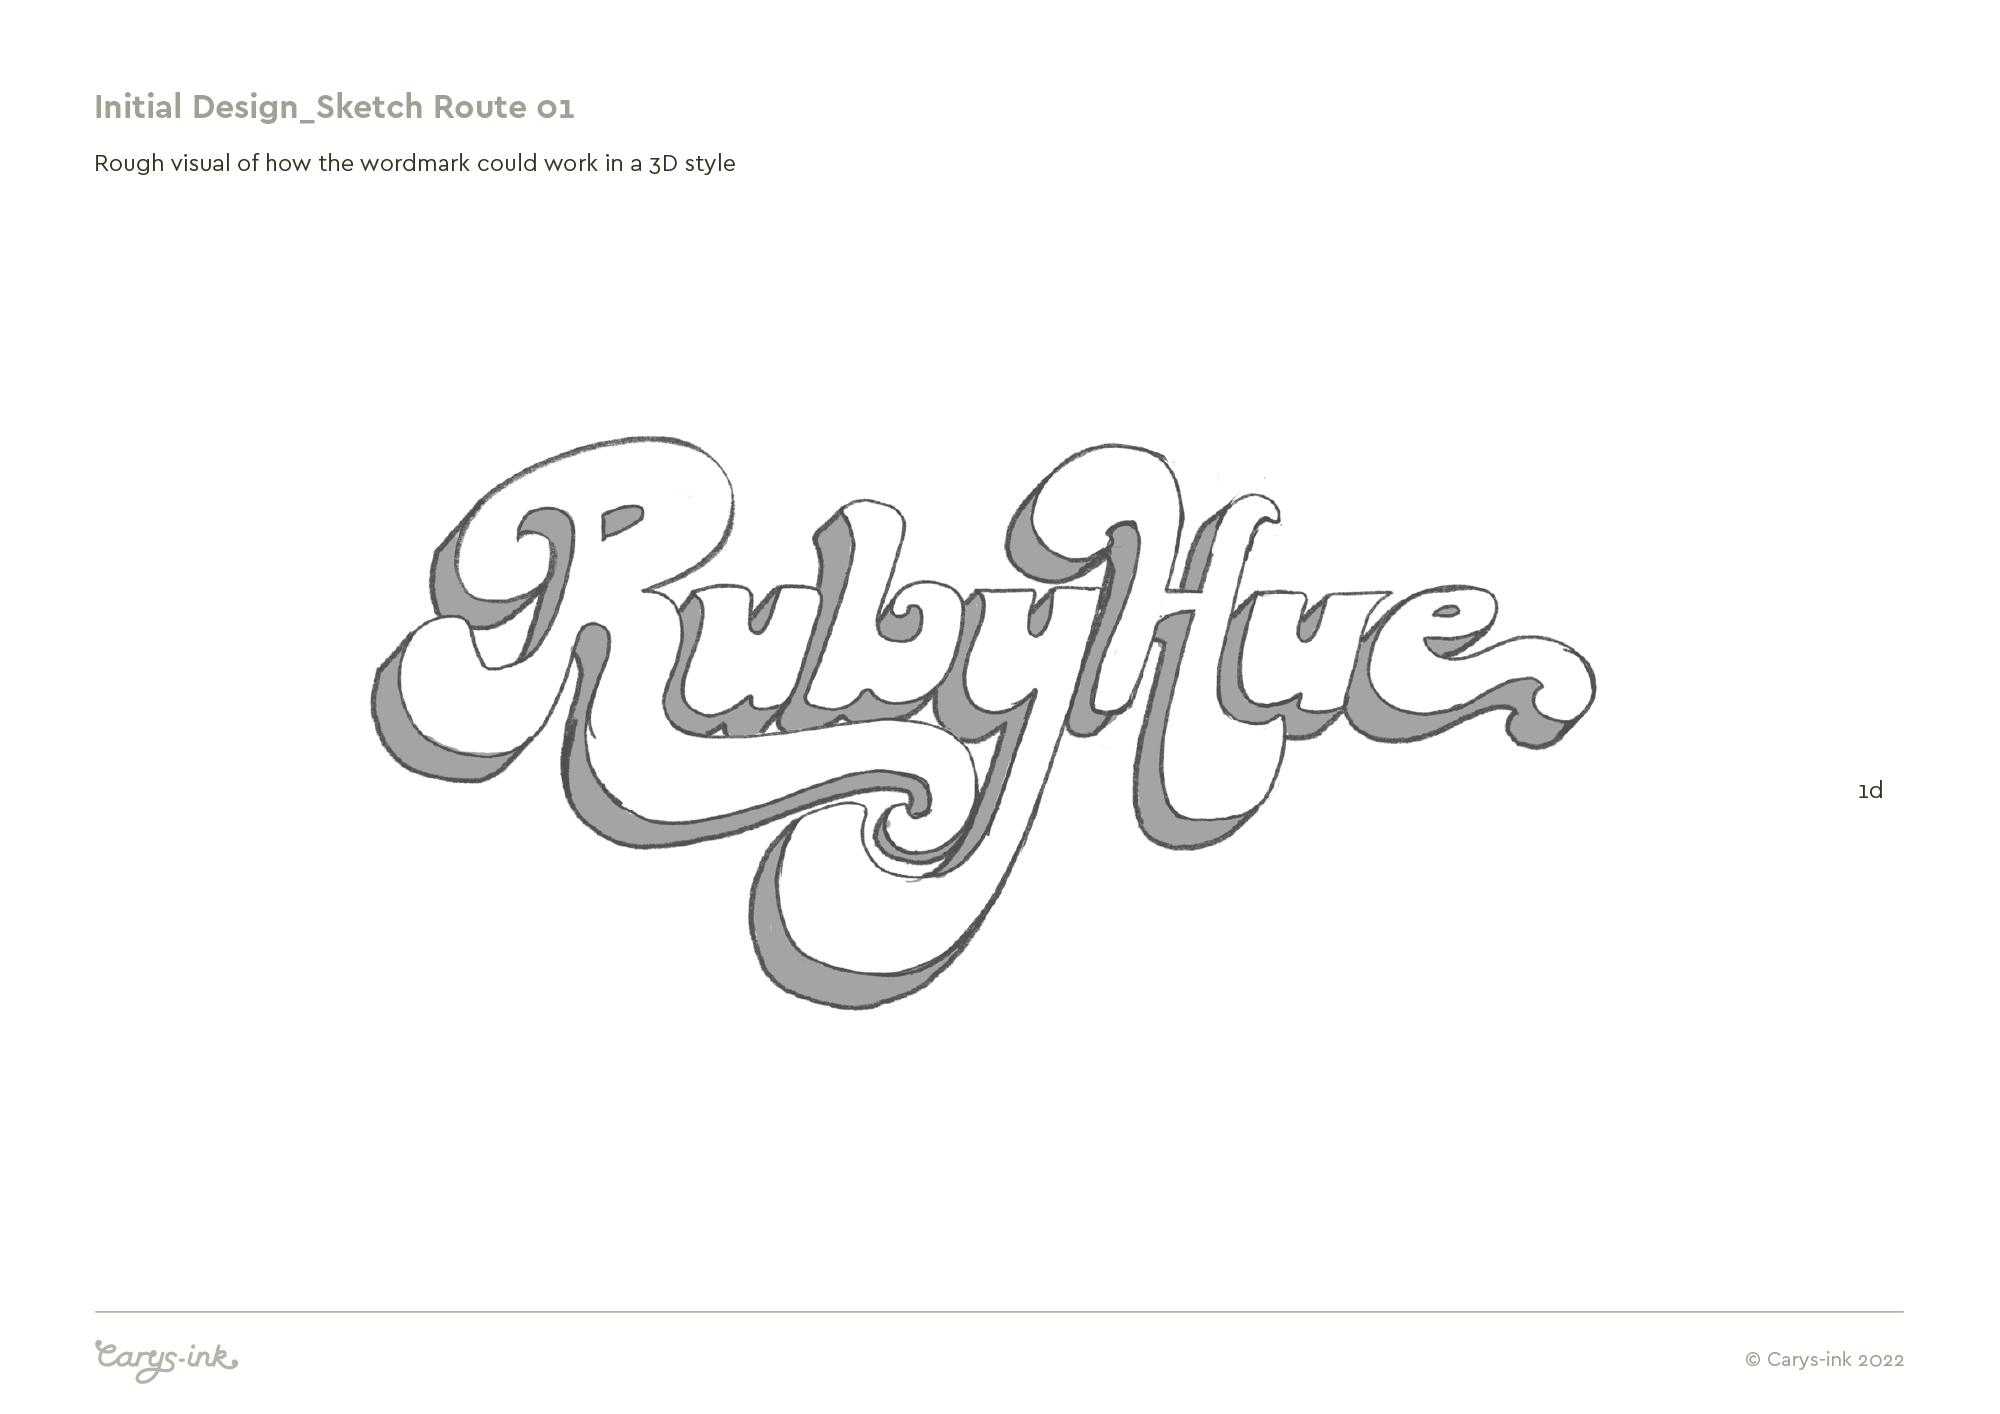 RubyHue_Identity05Sketchc.png